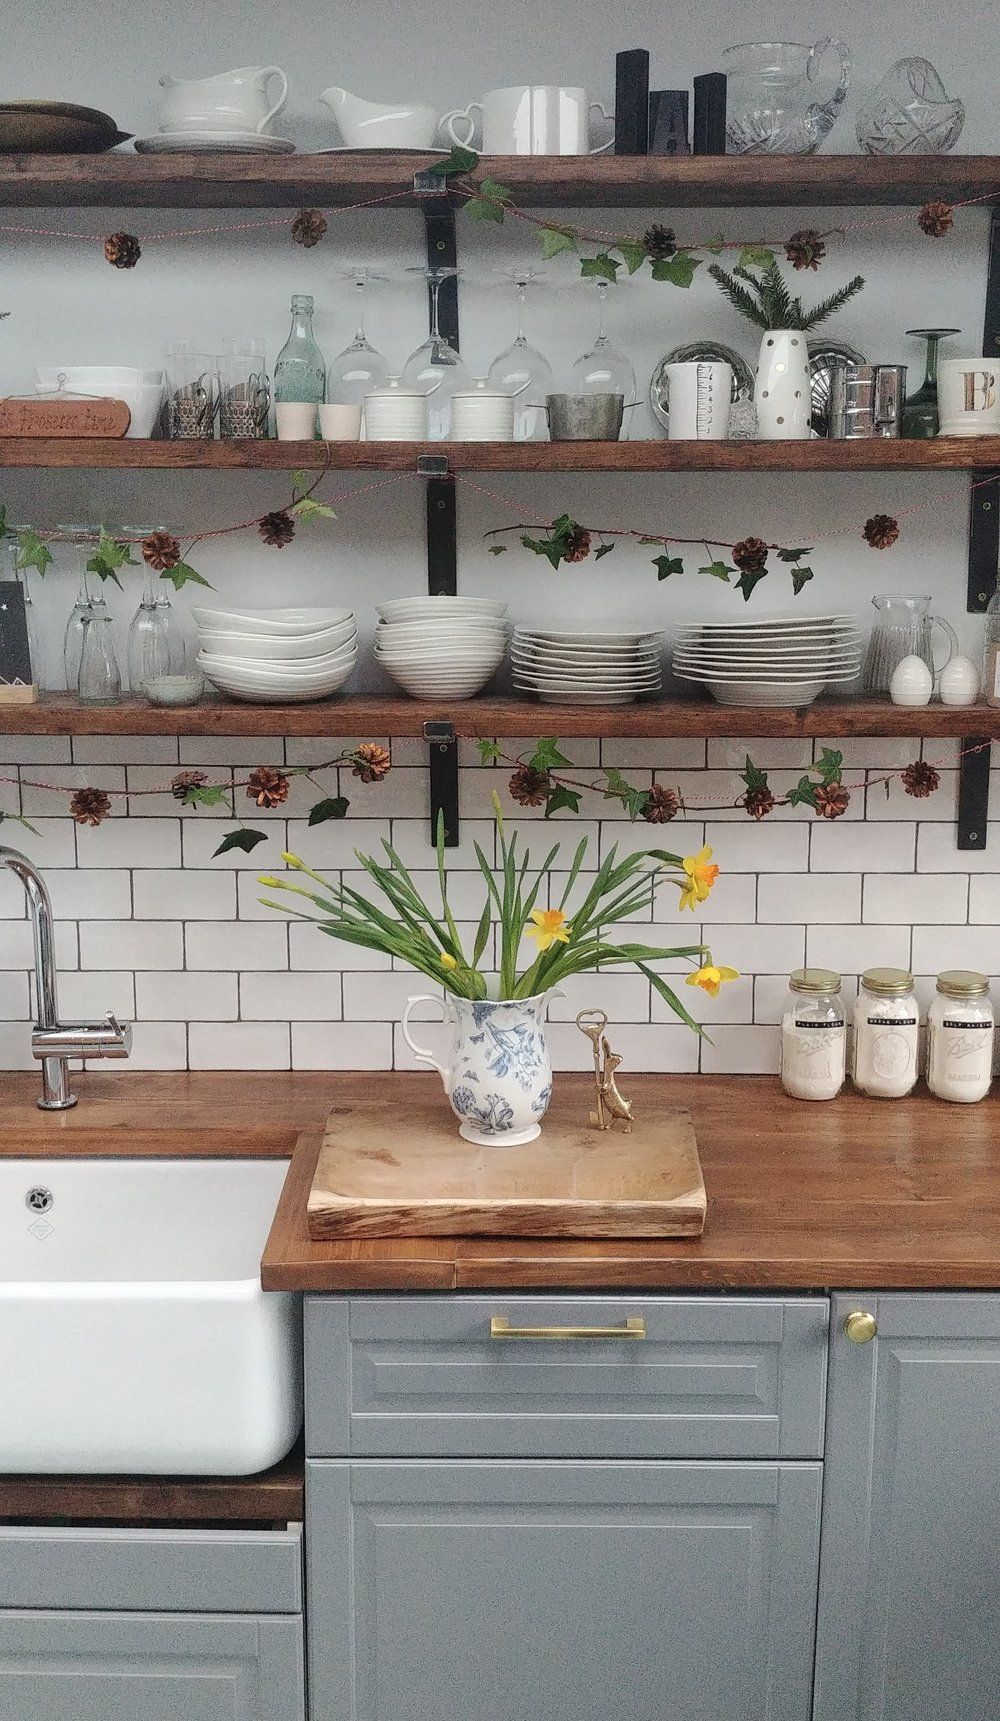 Kitchen shelves help to declutter your
kitchen being practical and functional